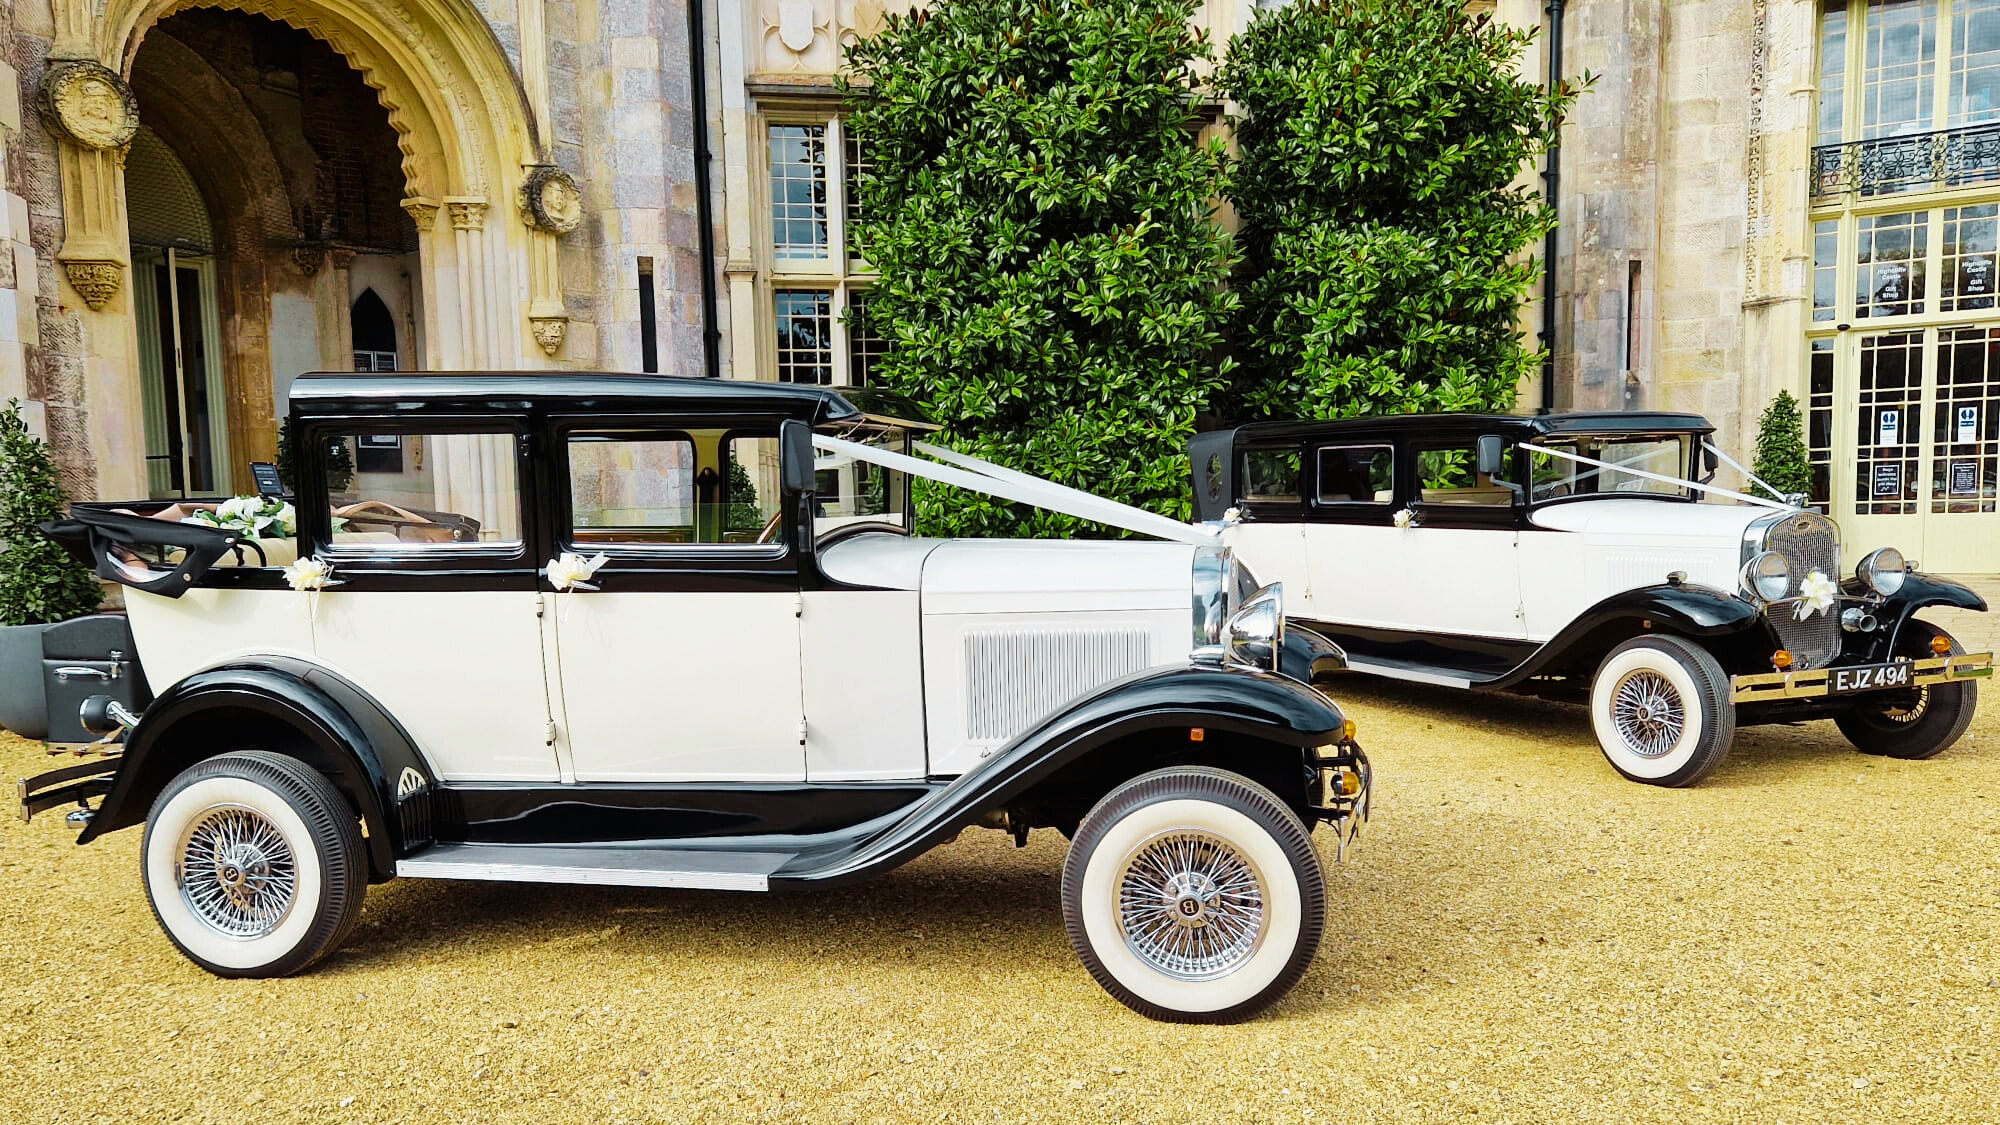 Two matching vintage wedding cars decorated with matching white ribbons. Vehicles are parked at the front entrance of a local wedding venue in Tyneham.